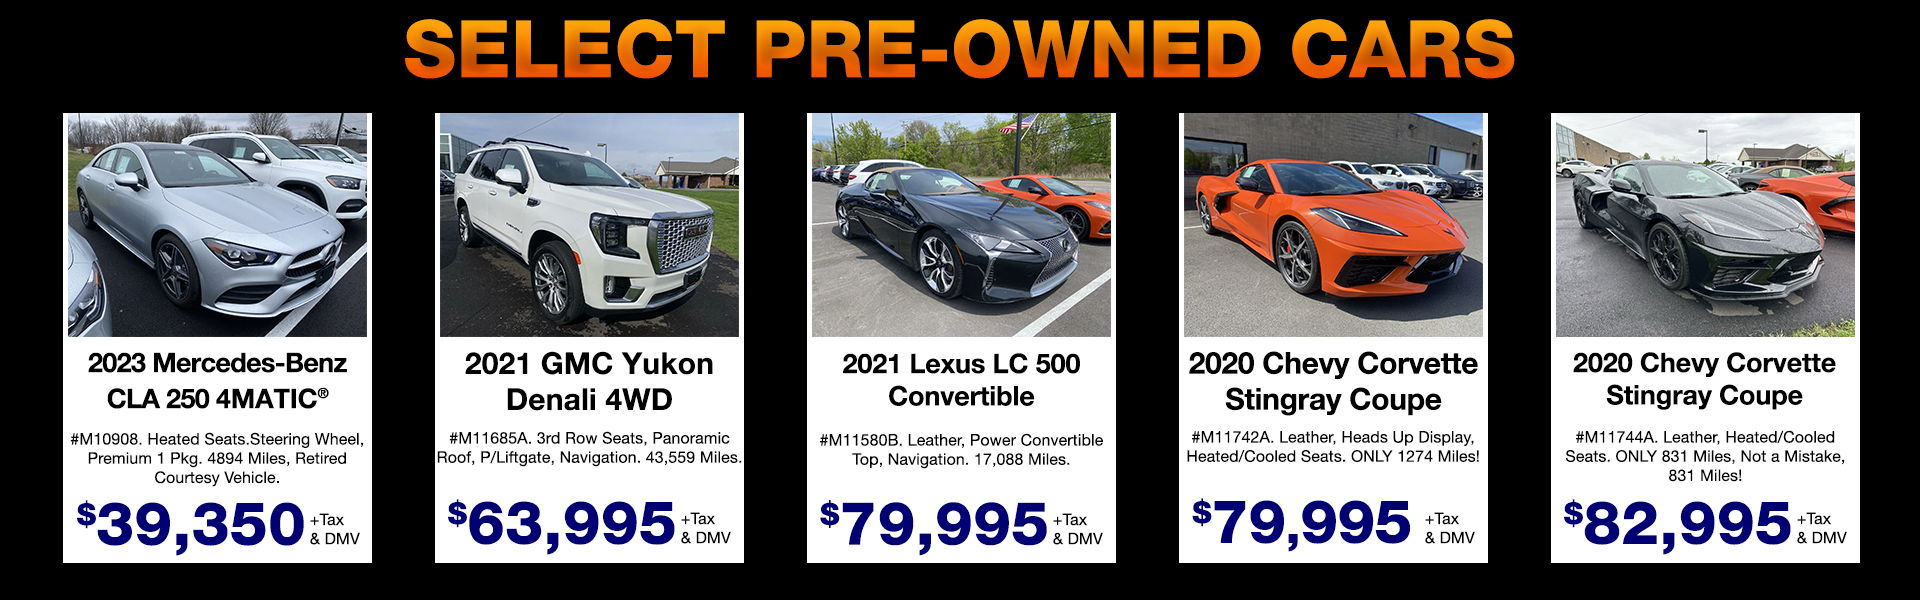 Select Pre-Owned 